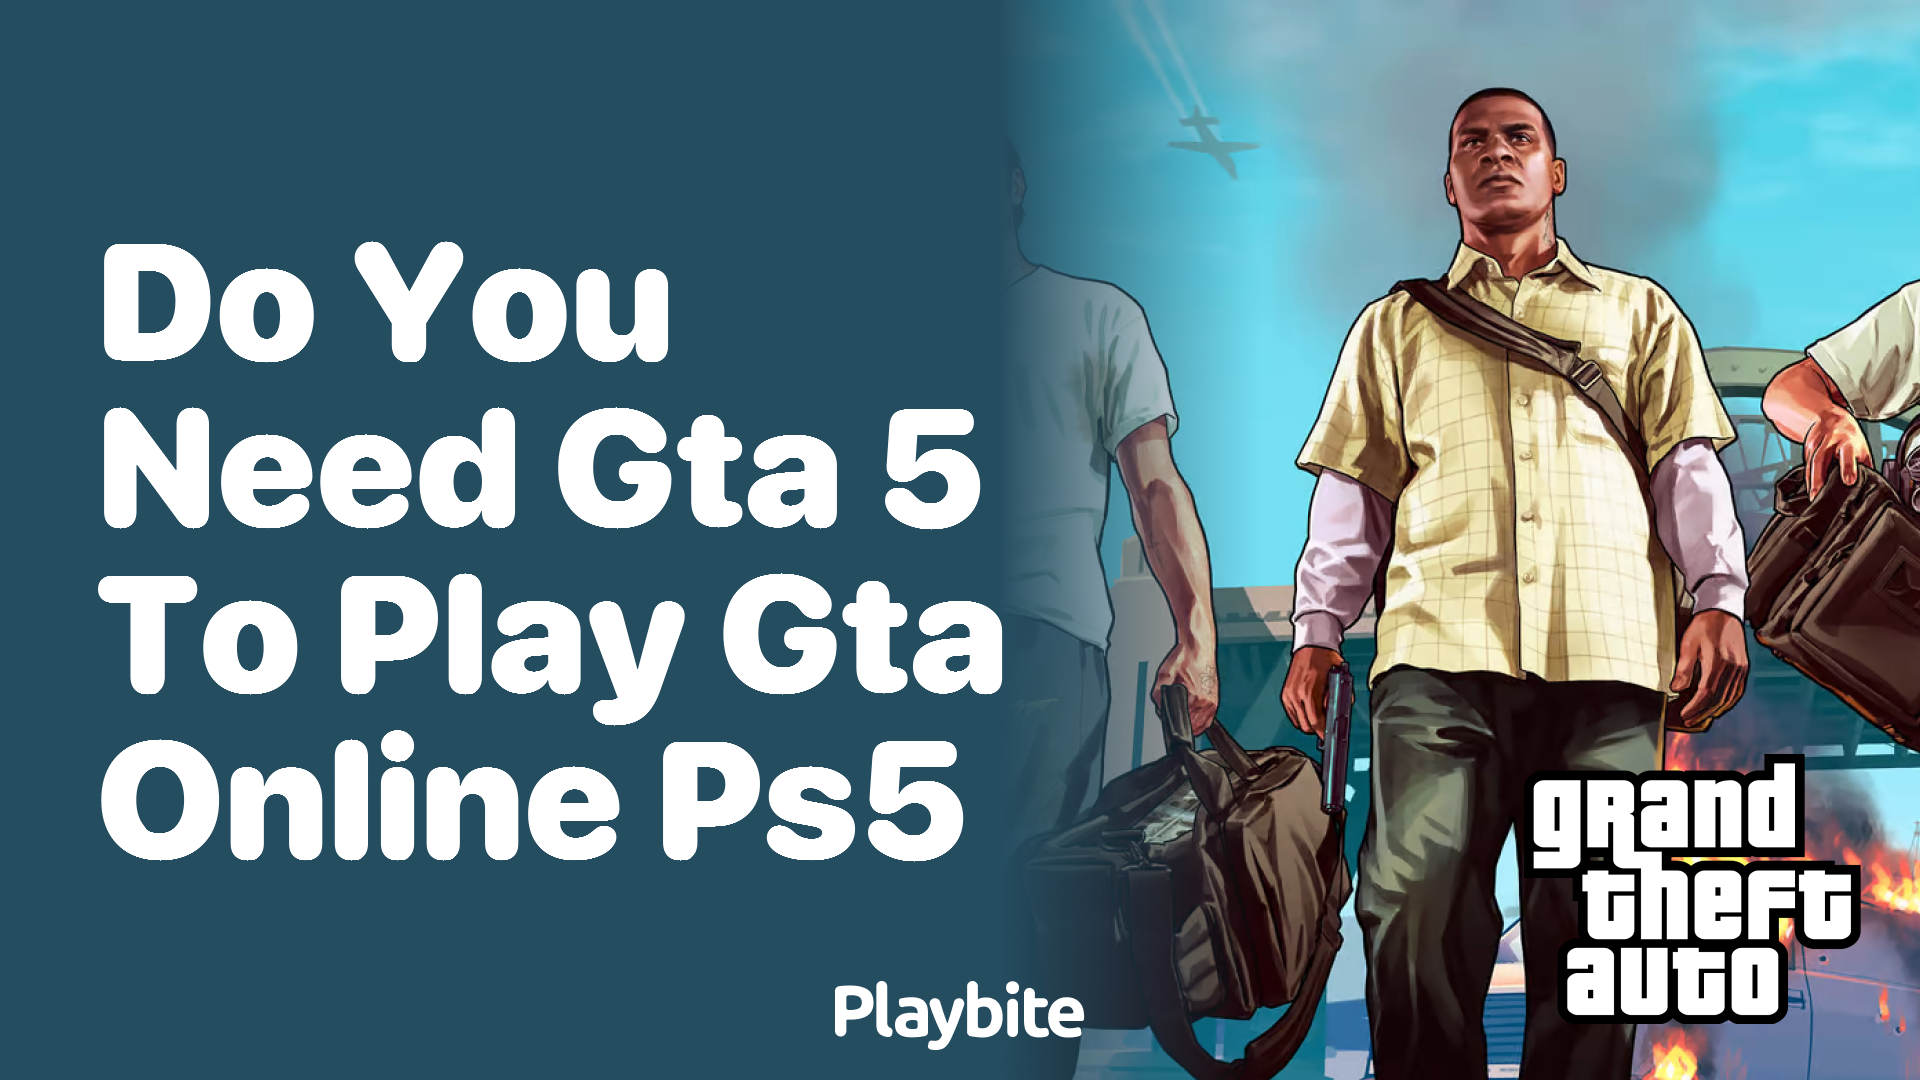 Do You Need GTA 5 to Play GTA Online on PS5?